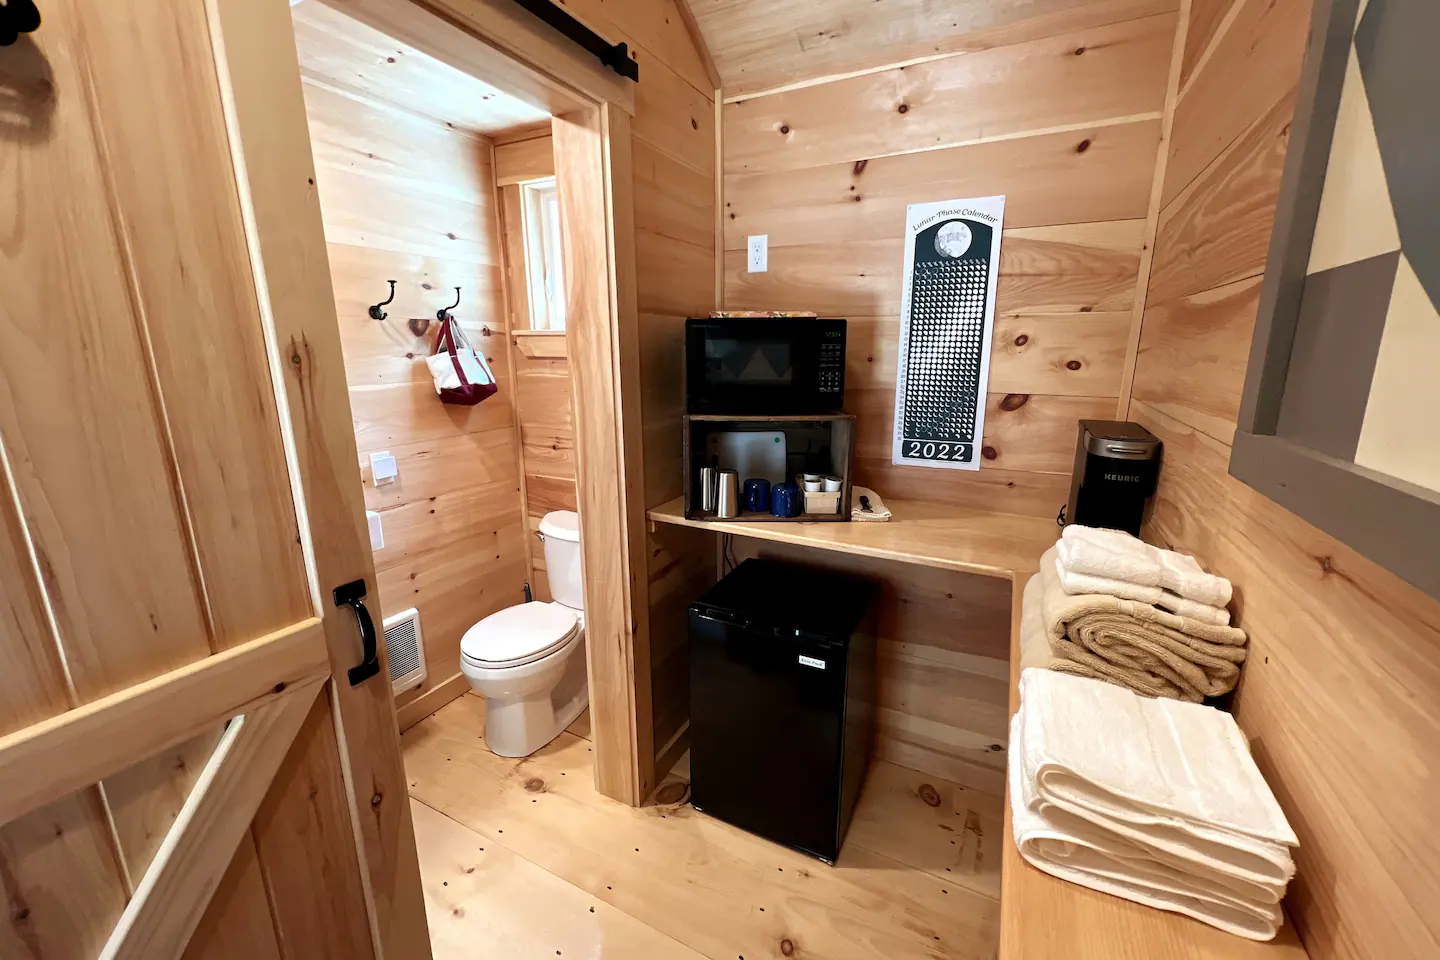 https://steamboatwharfcabins.com/wp-content/uploads/2023/03/7.webp